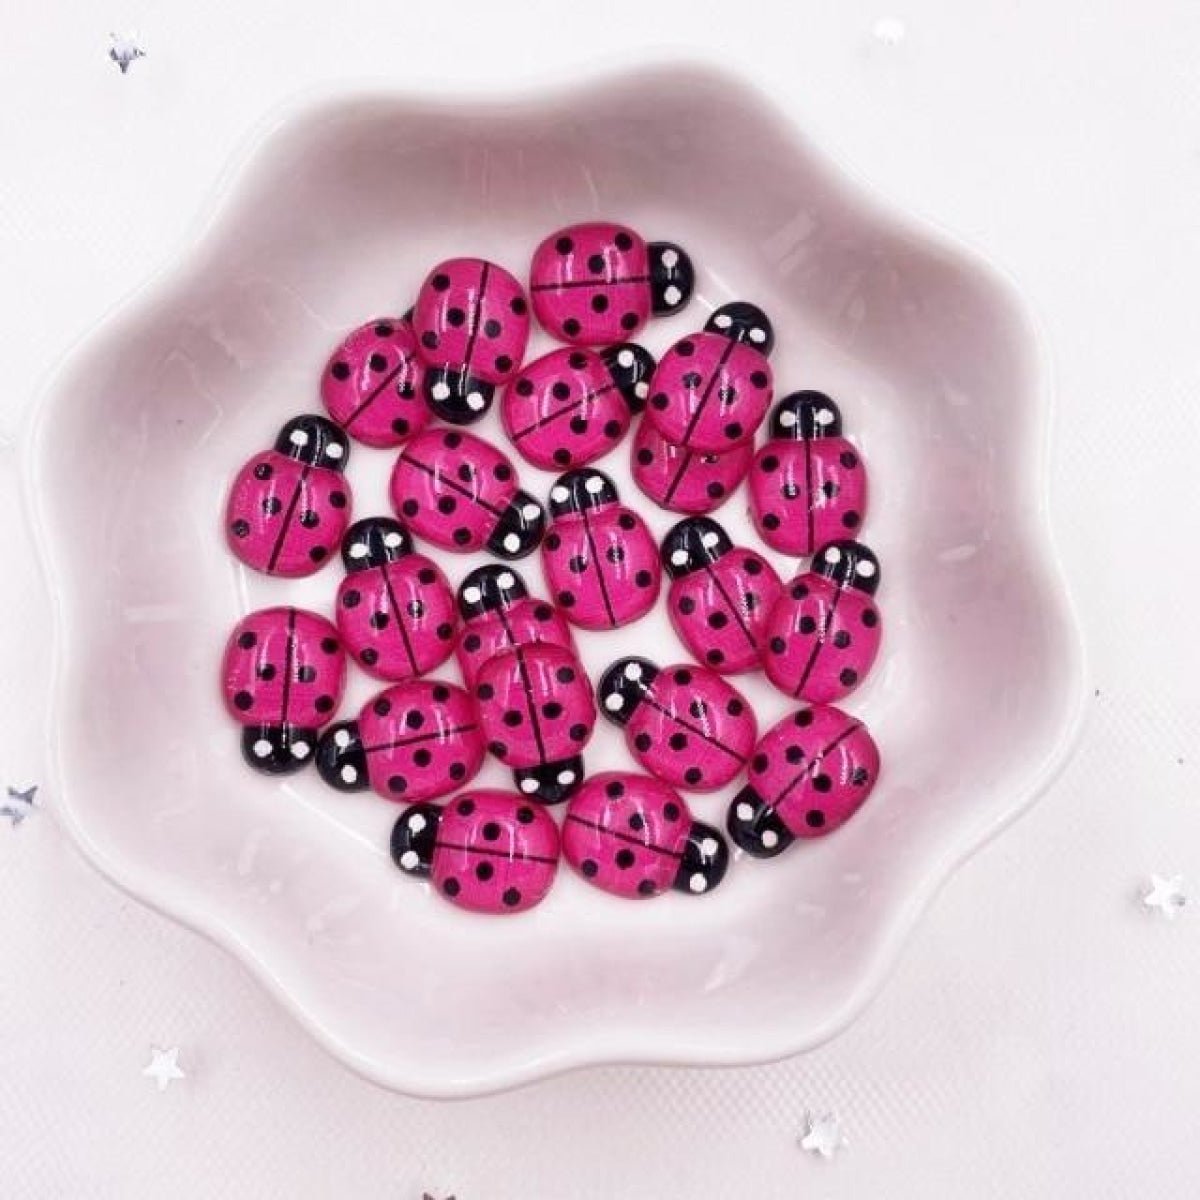 50pcs Bee Resin Flat Back Mini DIY Scrapbooking Crafts Home Decorations Resin Shape - Cherry Pink - - Asia Sell